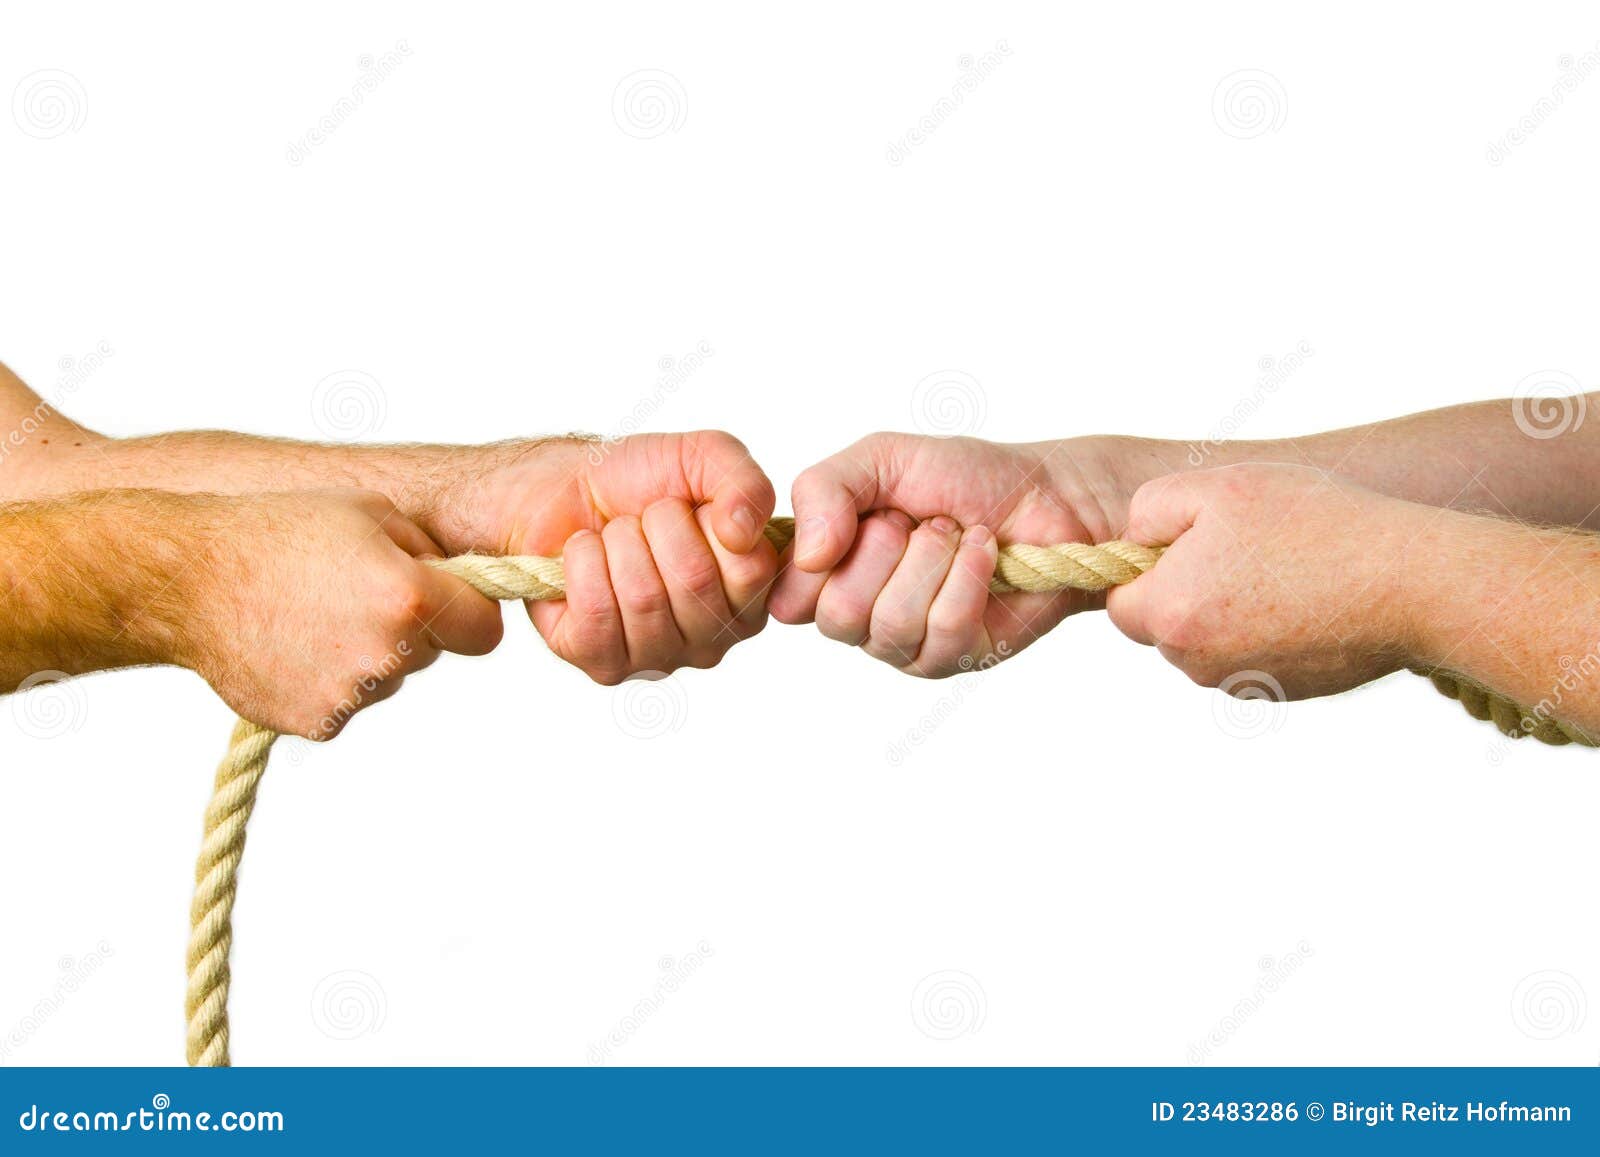 Hands pull a rope stock photo. Image of motivation, human - 23483286